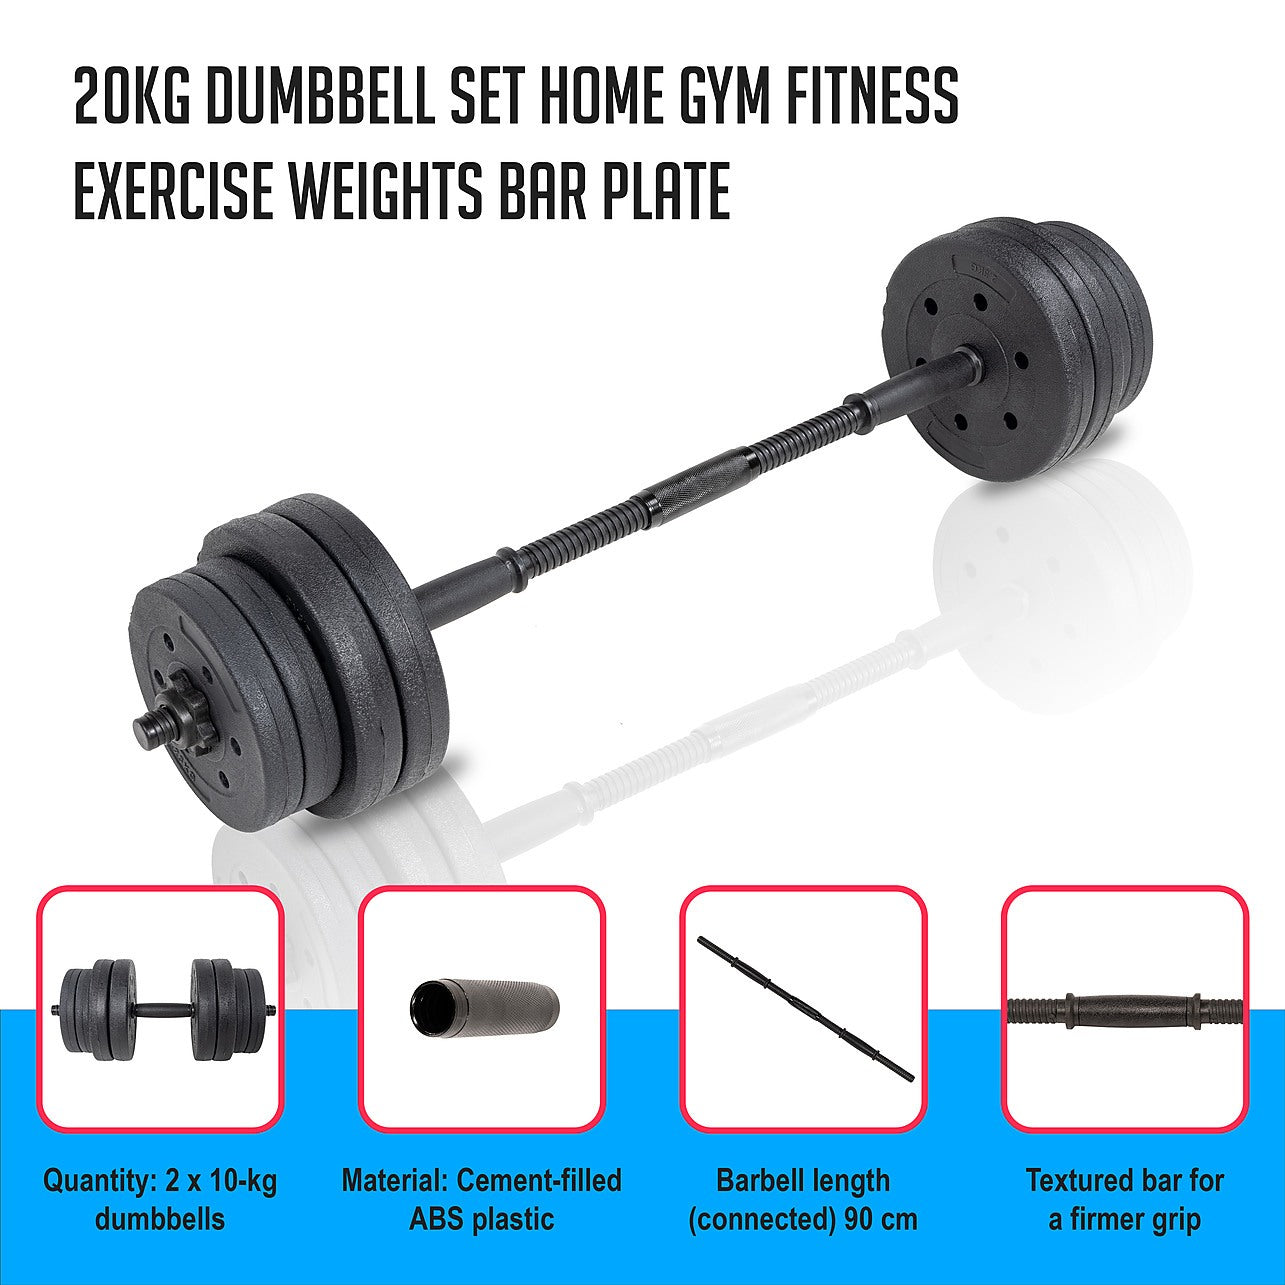 Buy Best Home Gym Equipment, Machines Sets Online SF, 54% OFF